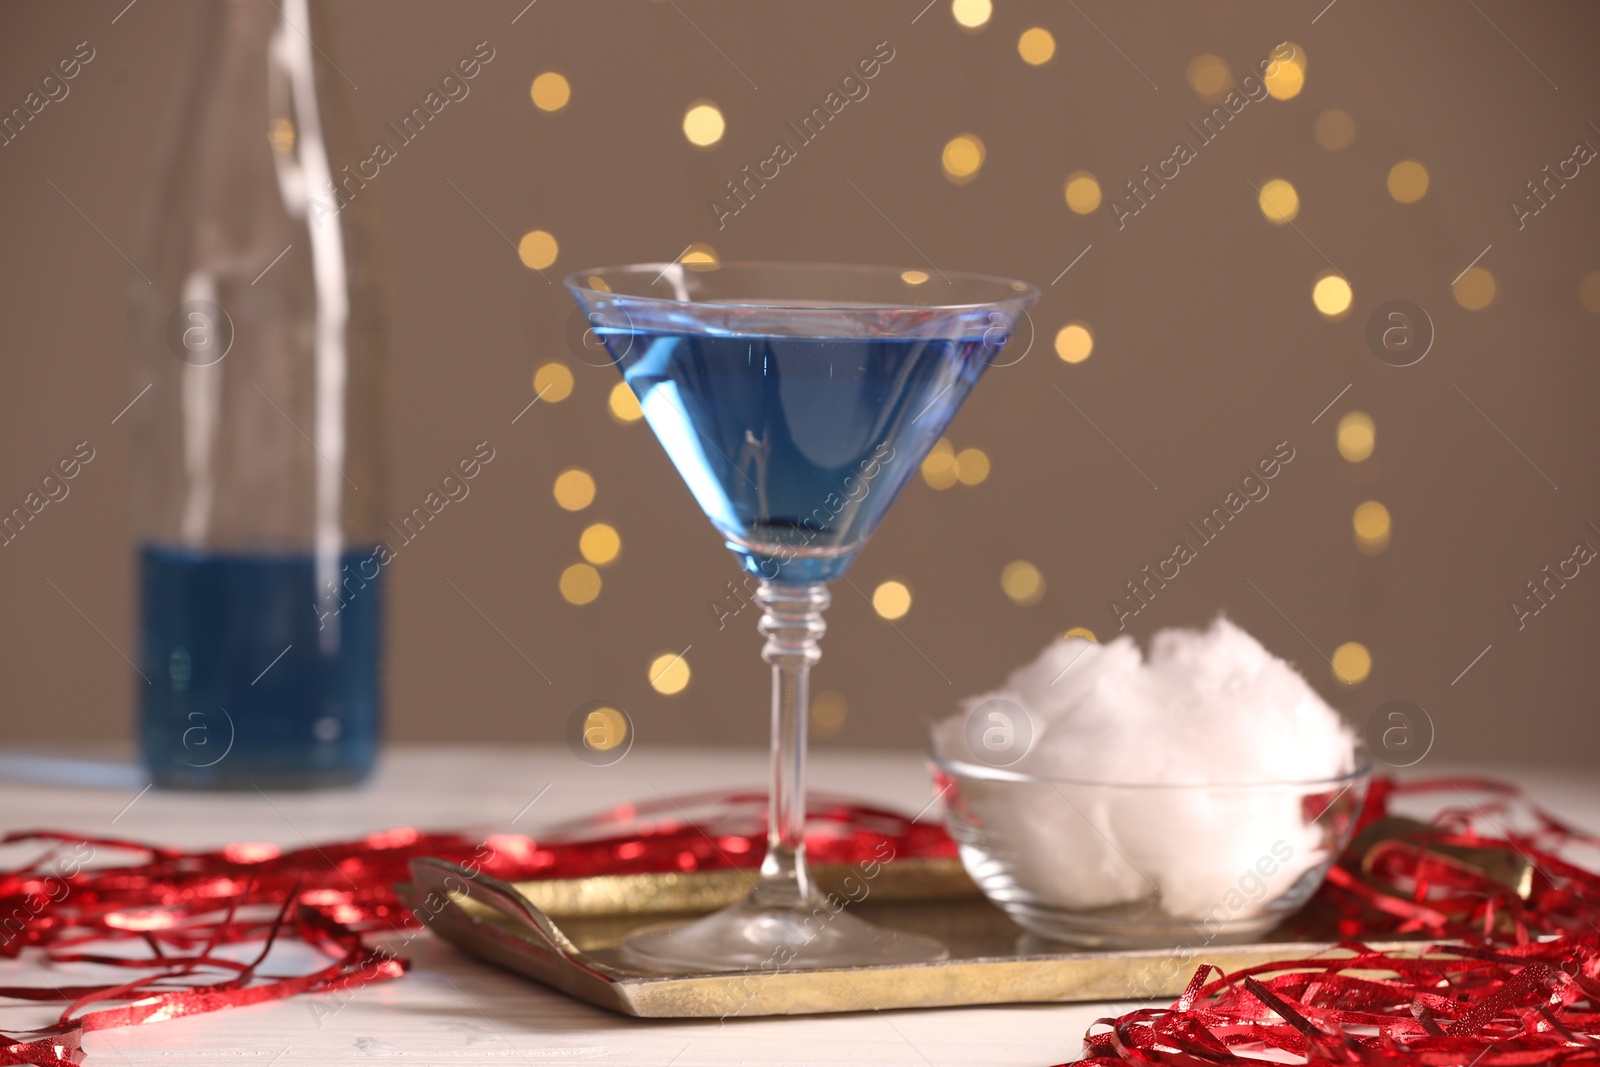 Photo of Tasty cocktail and cotton candy on white table against beige background with blurred lights, closeup